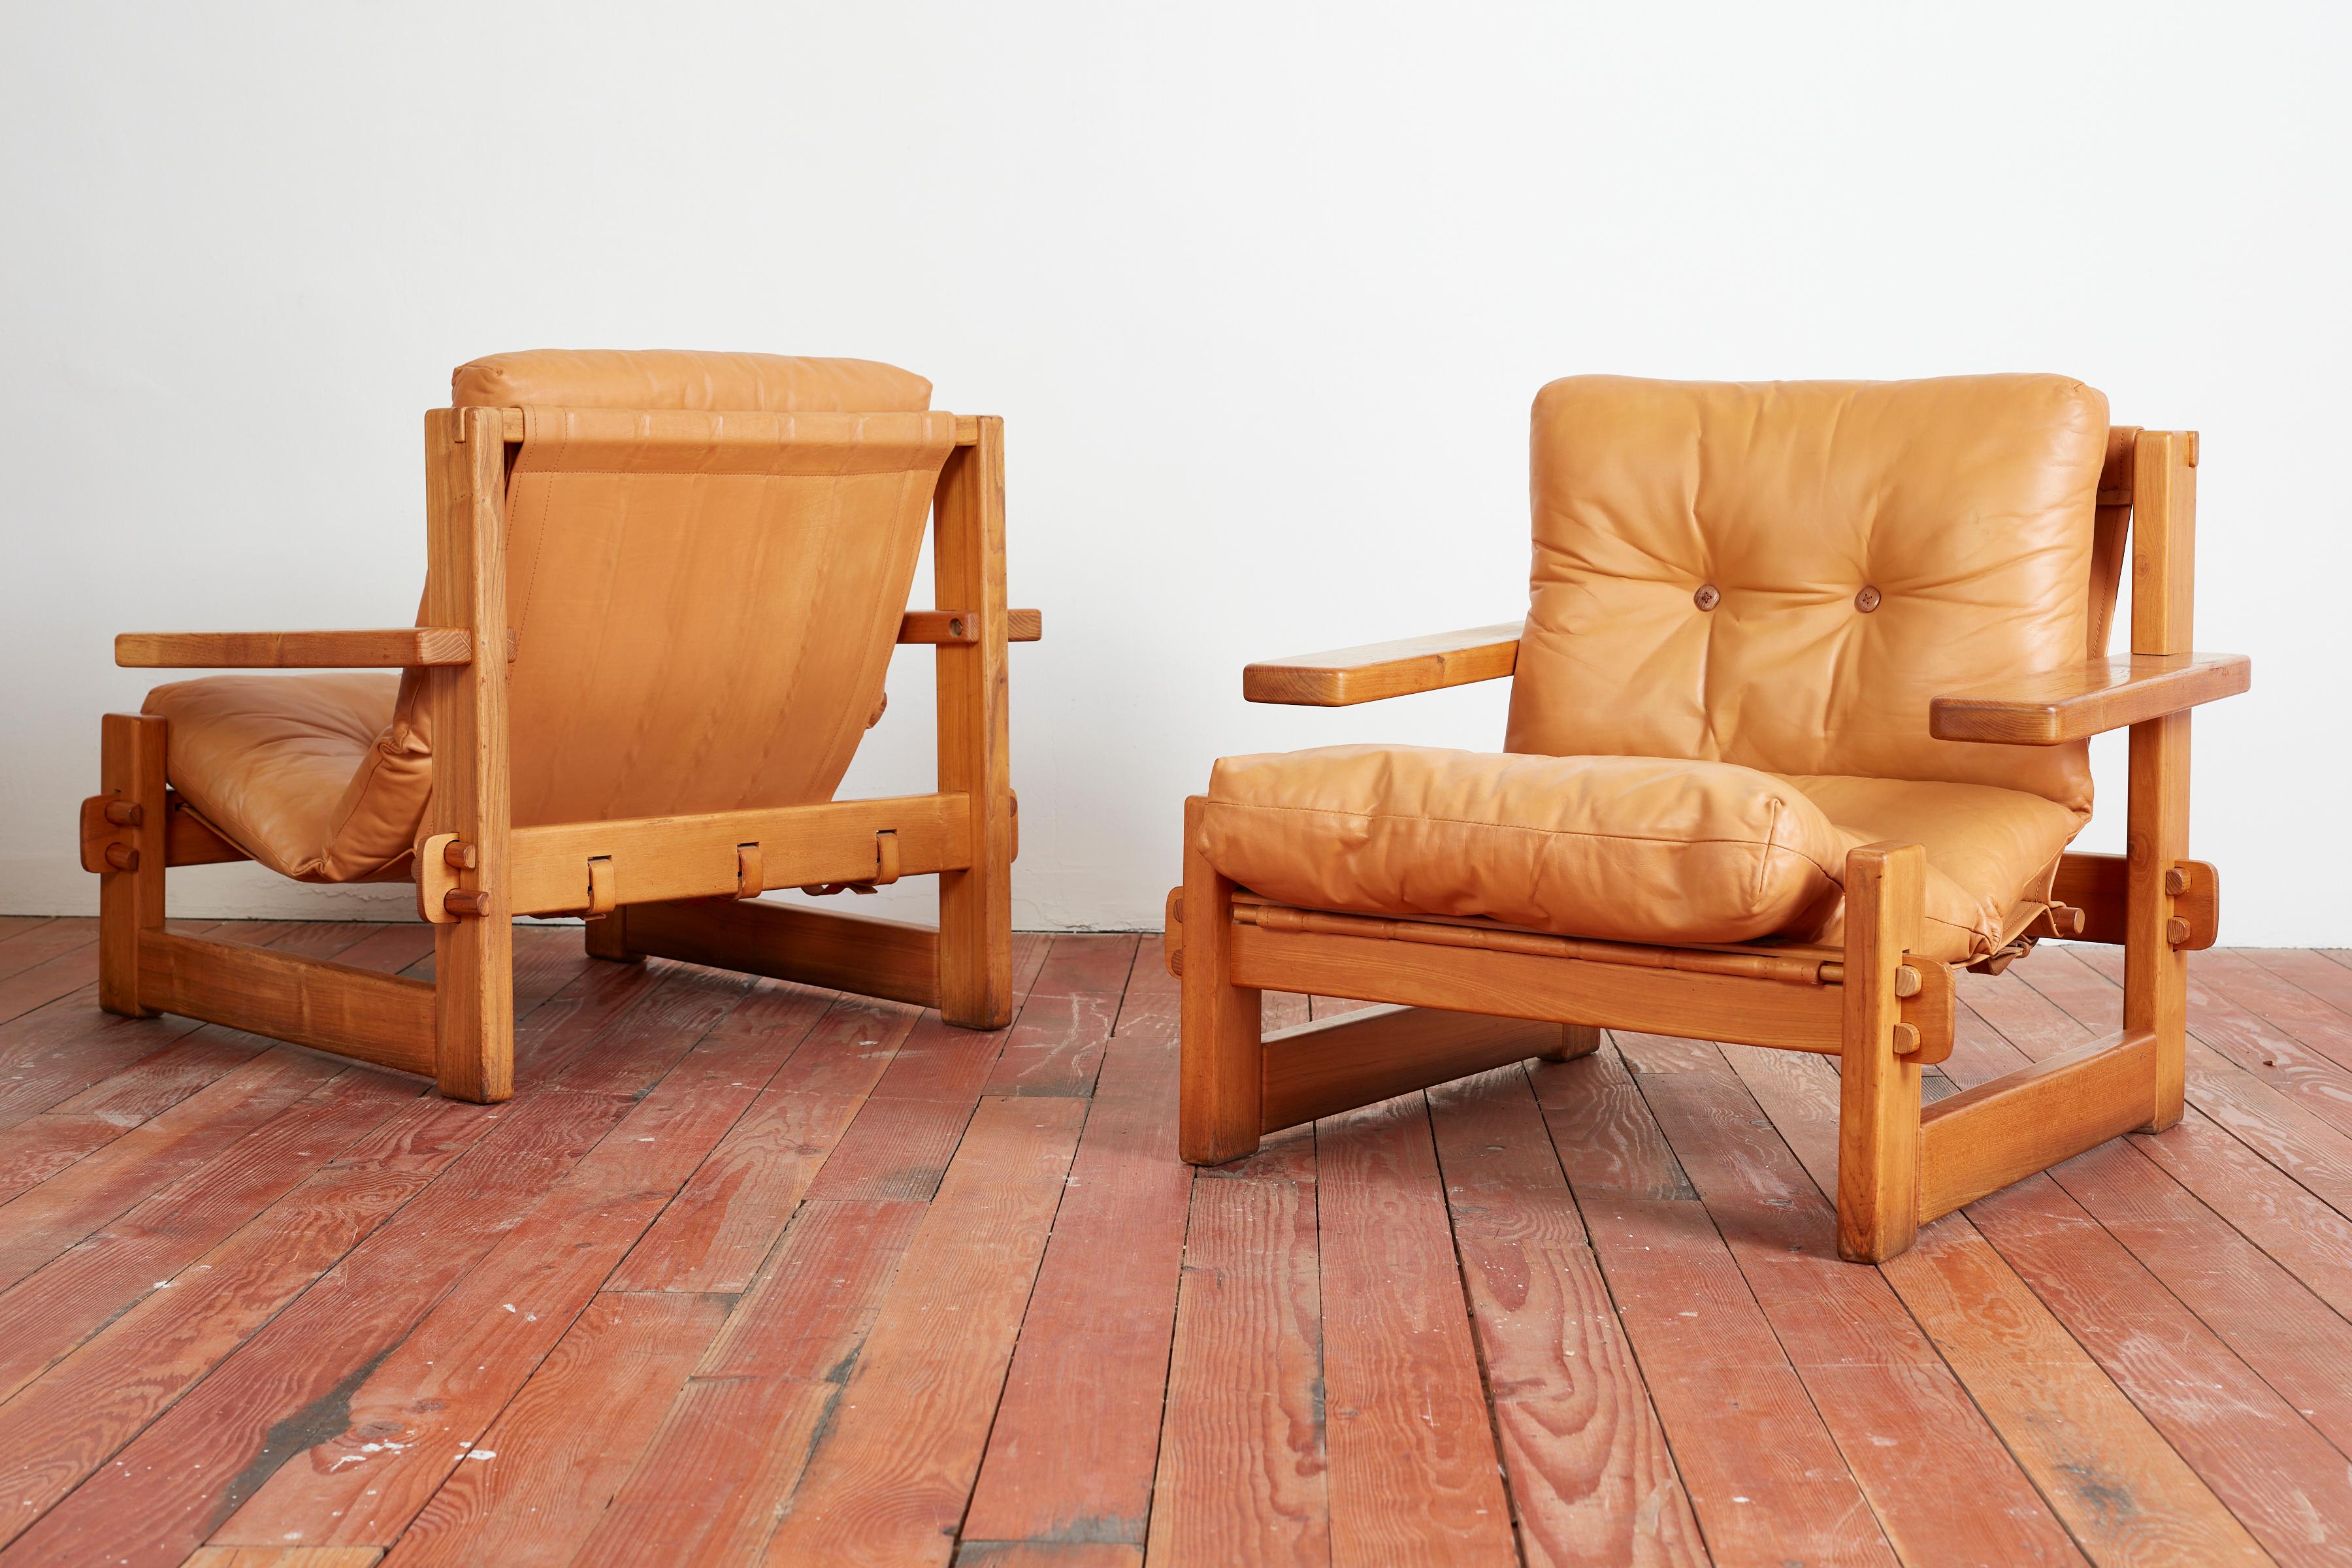 Unique cubist shaped oak chairs with cantilevered paddle arms and leather sling cushions. 
Wonderful construction with doweling holding the frame 
Butterscotch original leather has been restored and visible from all sides 
Back buckle